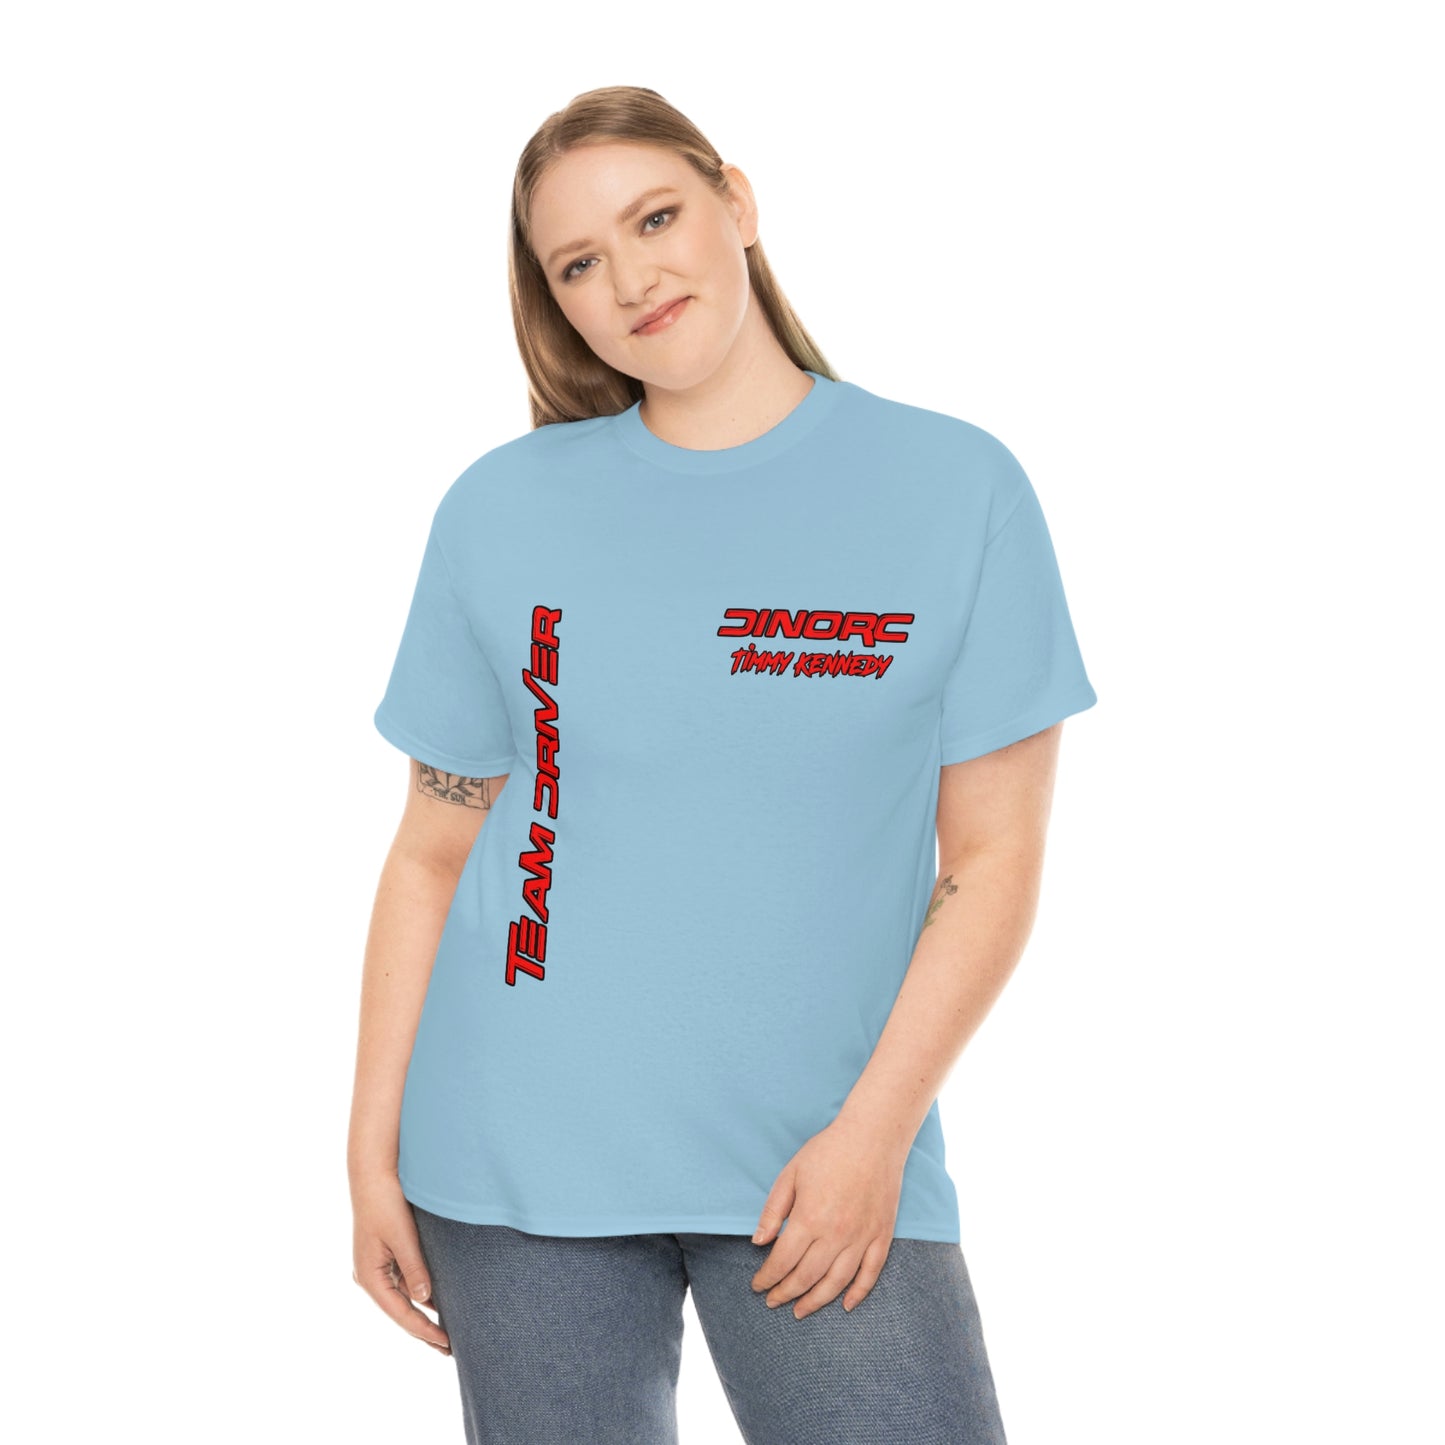 Team Driver Timmy Kennedy Front and Back DinoRc Logo T-Shirt S-5x 5 colors